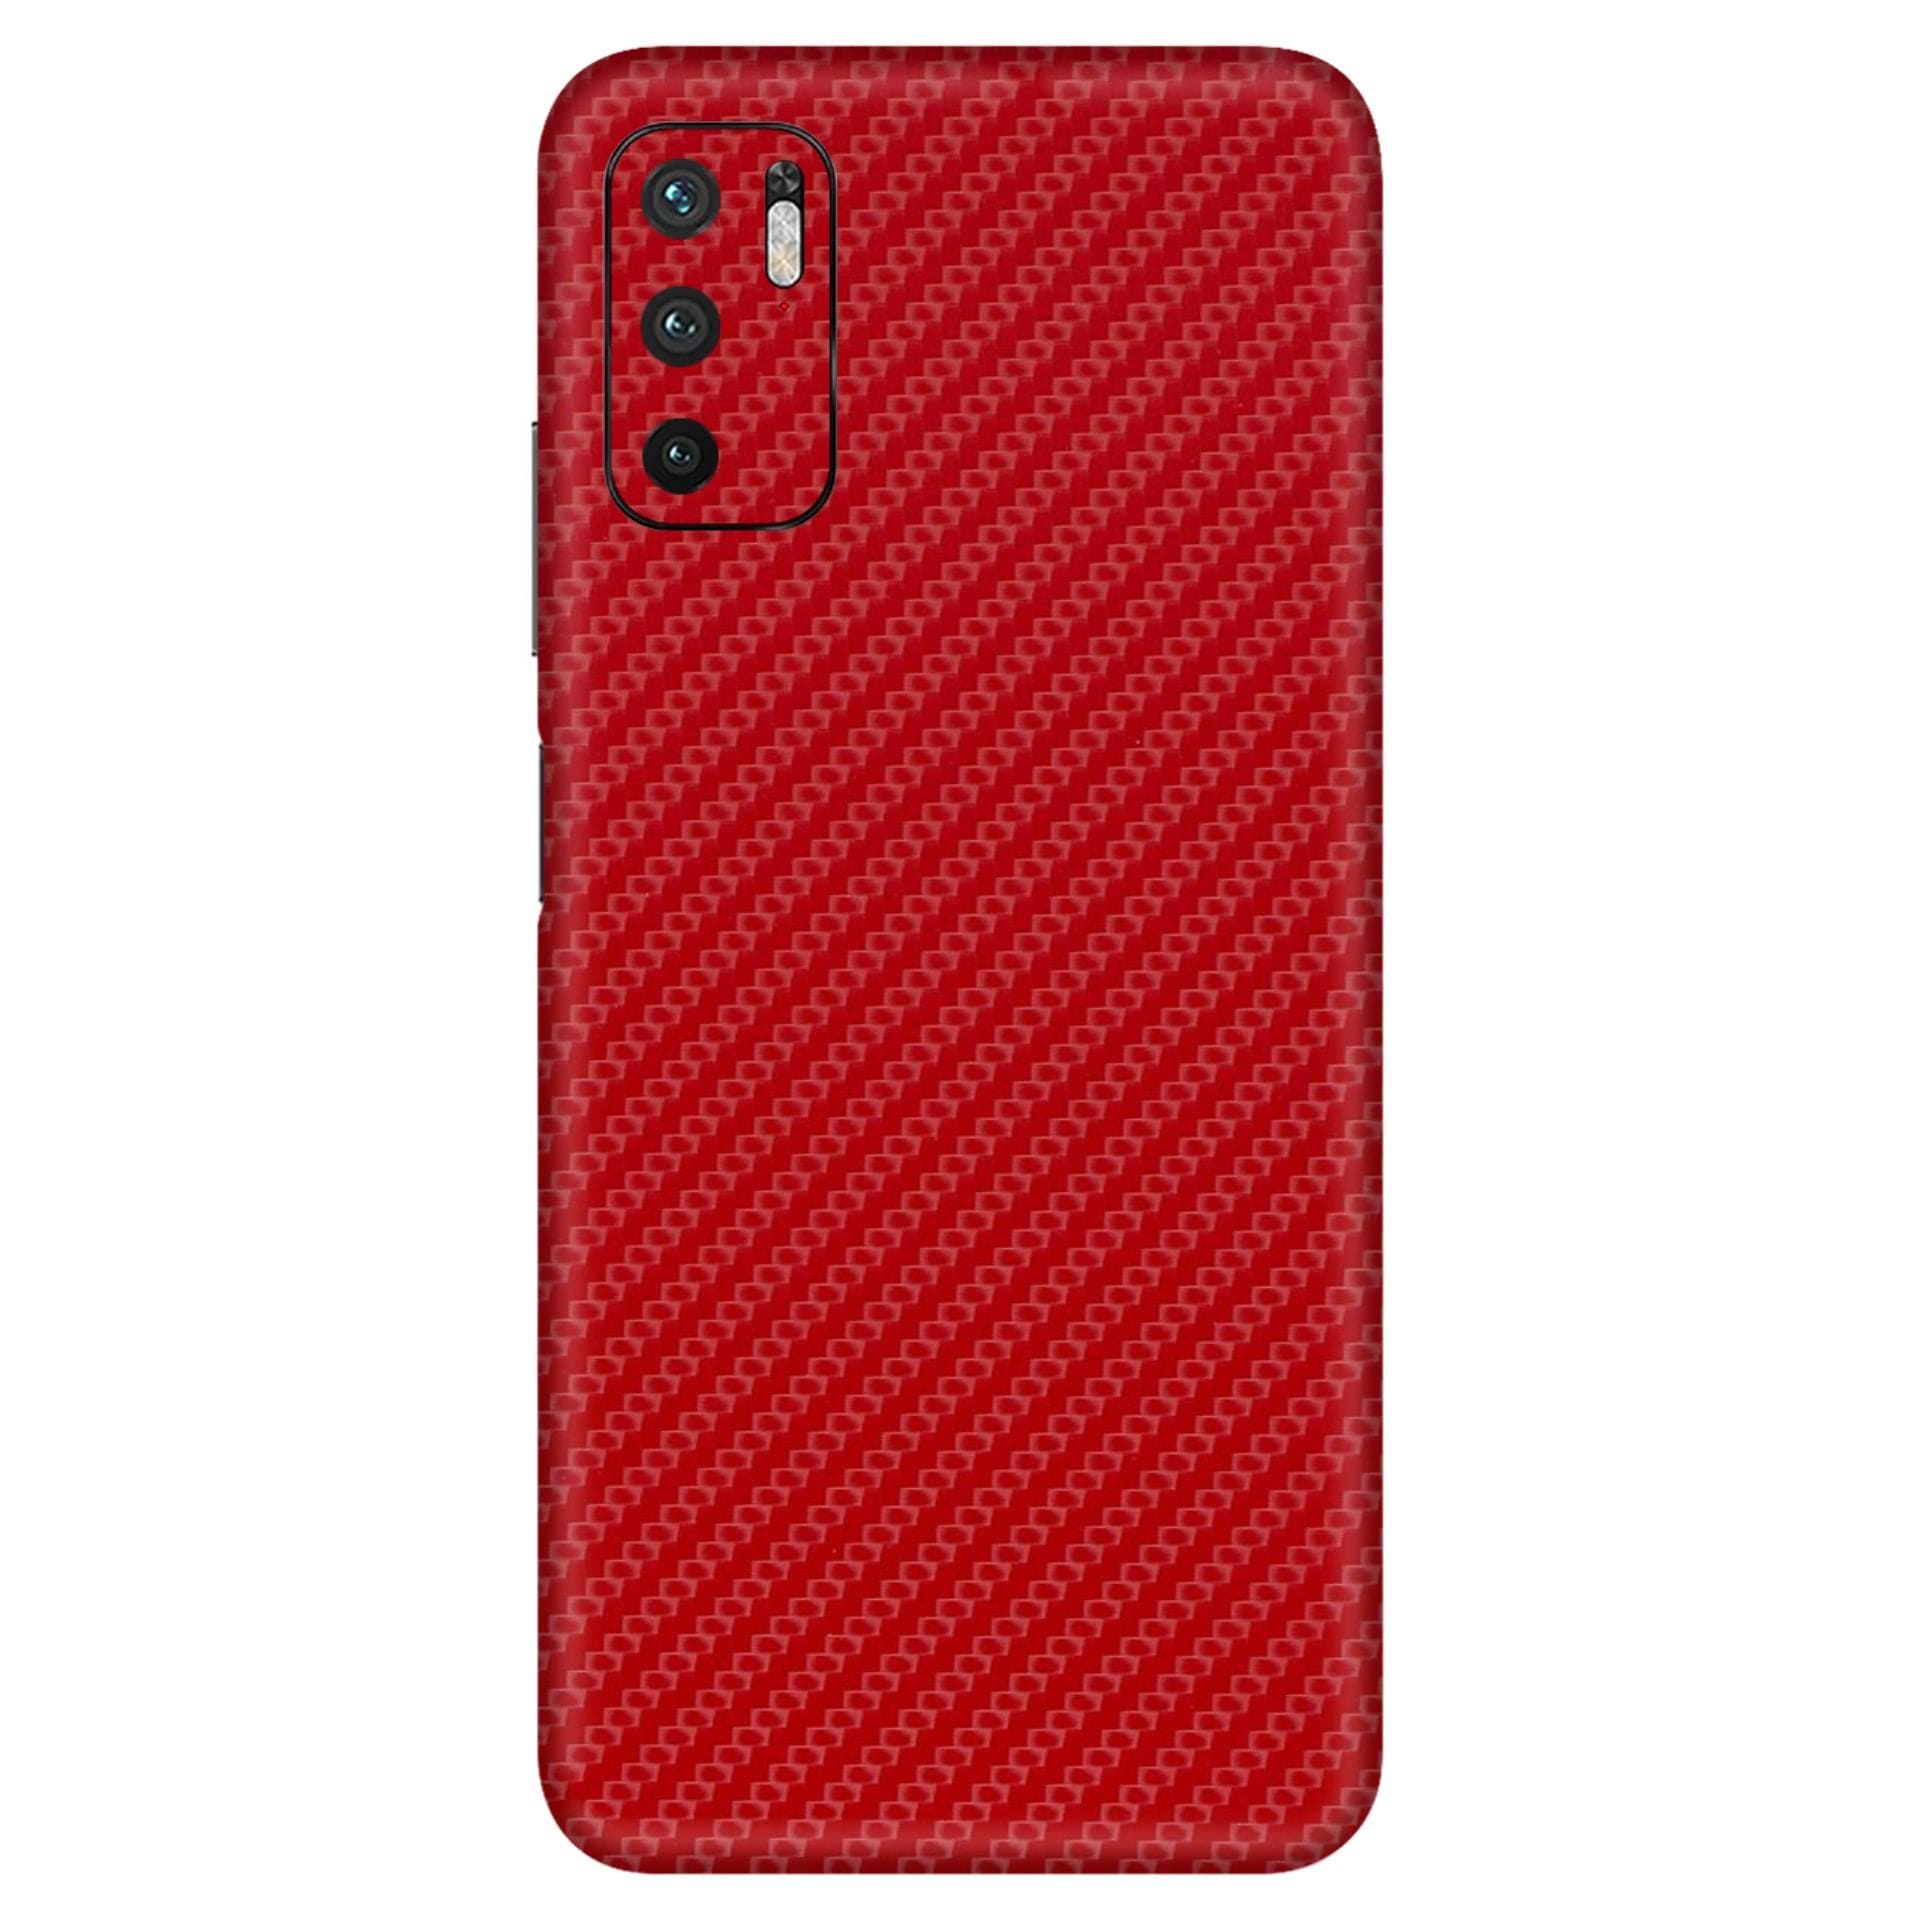 Redmi Note 10T Carbon Red skins